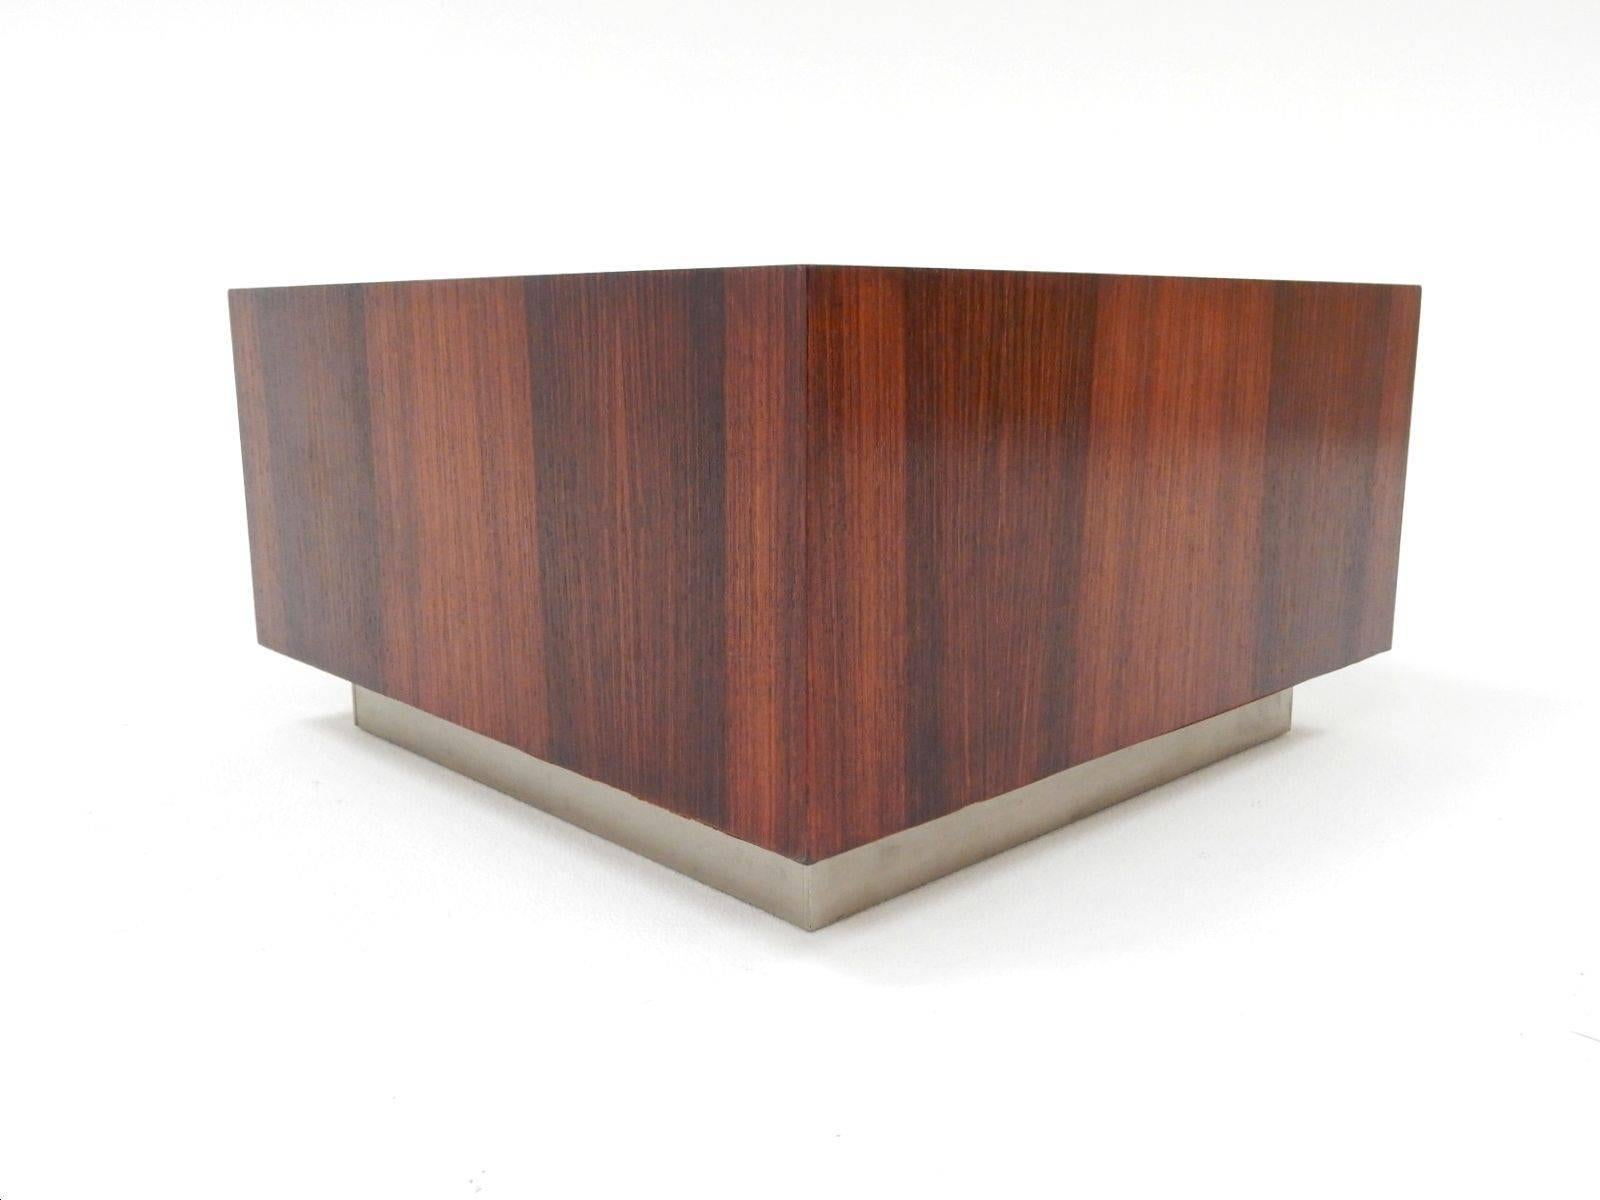 Stunning cocktail table with matched grain rosewood veneer on a brushed aluminum plinth.
High caliber piece of furniture, un-marked.
Minty condition with no chips.